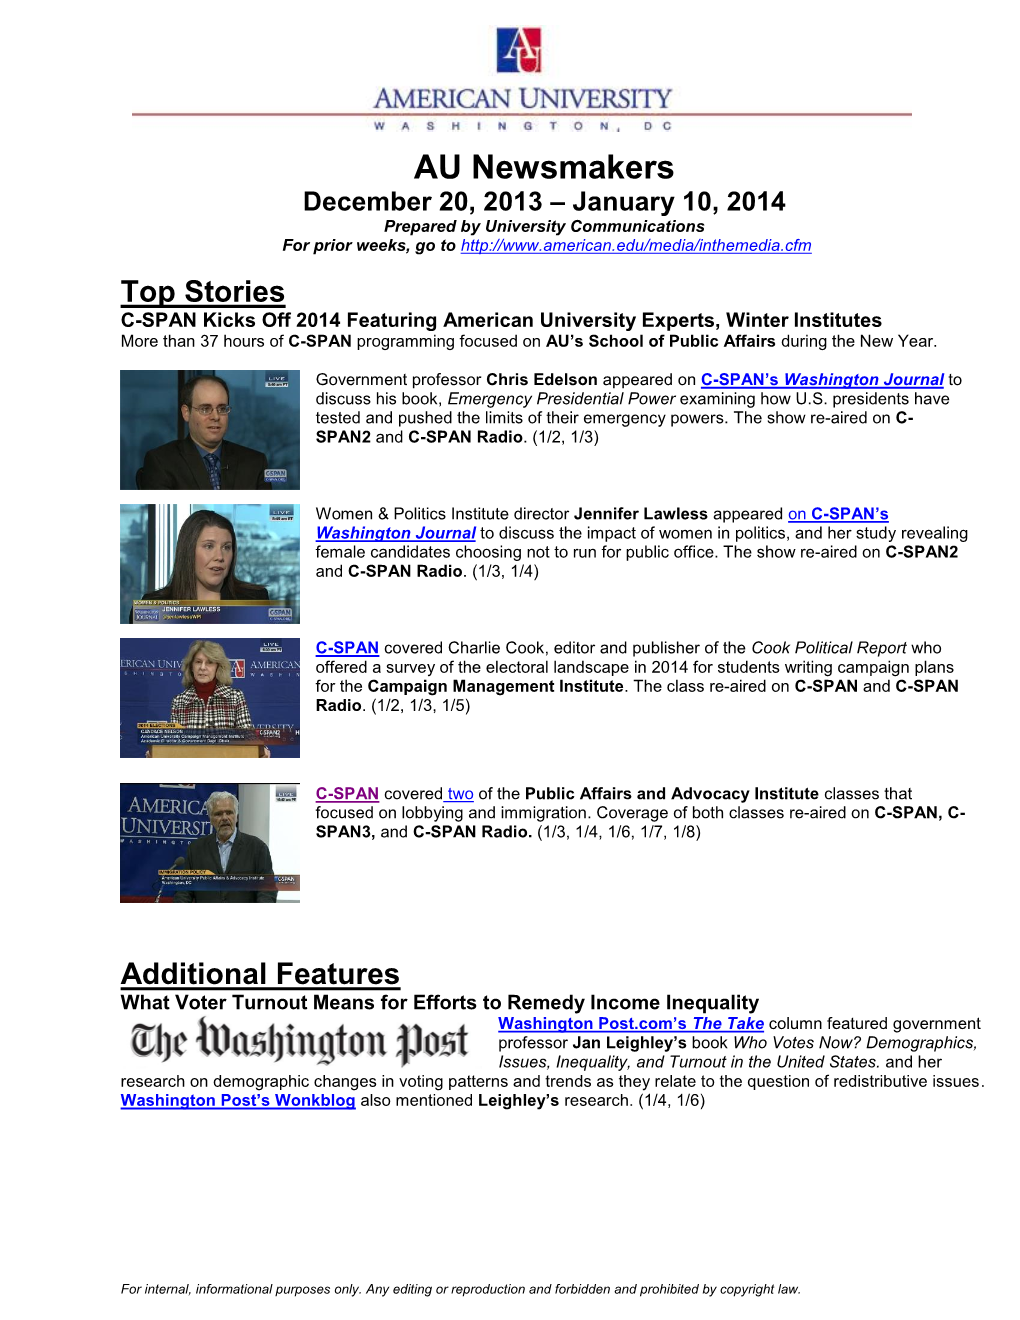 AU Newsmakers December 20, 2013 – January 10, 2014 Prepared by University Communications for Prior Weeks, Go To